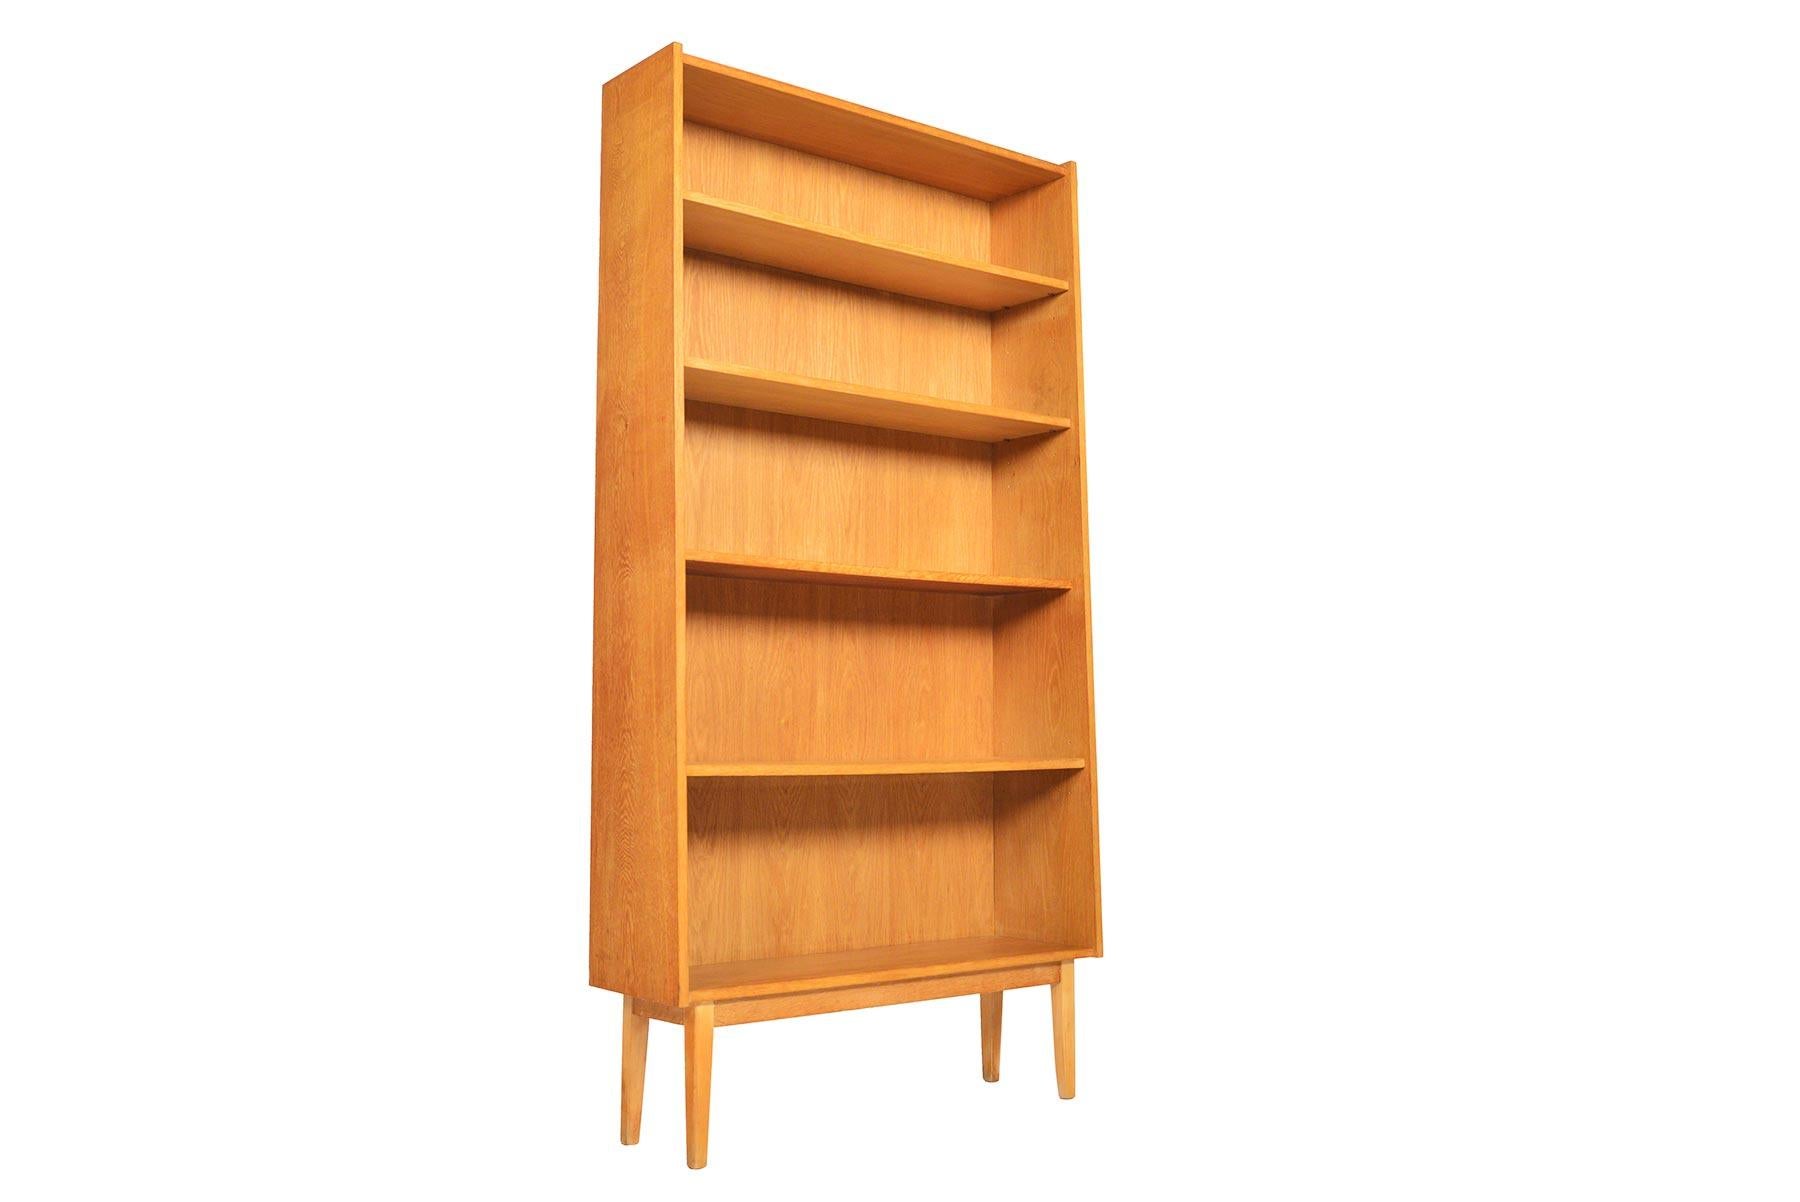 This stately Danish modern midcentury bookcase in oak is the perfect storage piece for any modern home. Three adjustable shelves provide versatility for storage. Case stands on a beautiful tapered oak base. In excellent original condition with